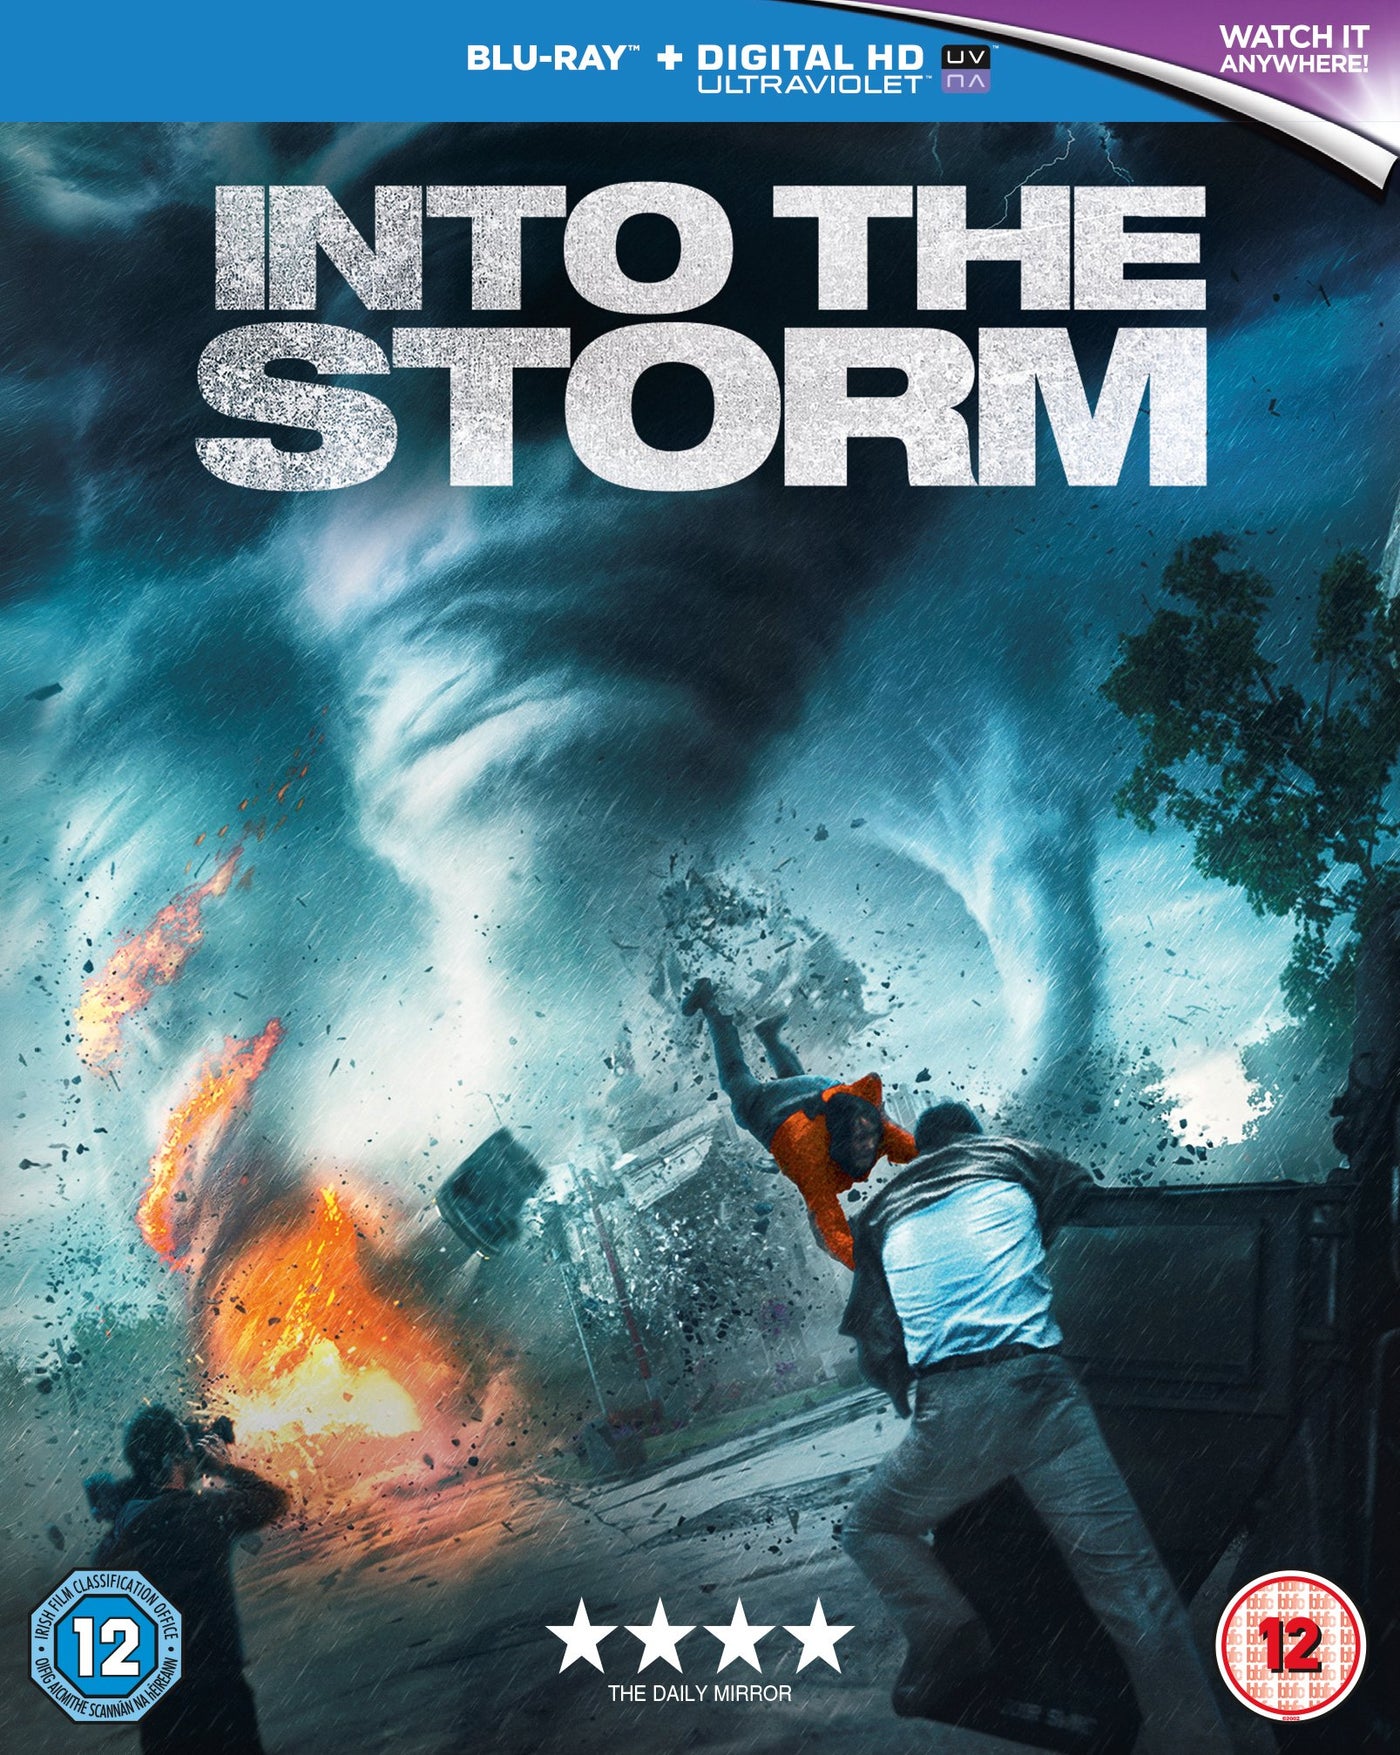 Into the Storm [2014] (Blu-ray)